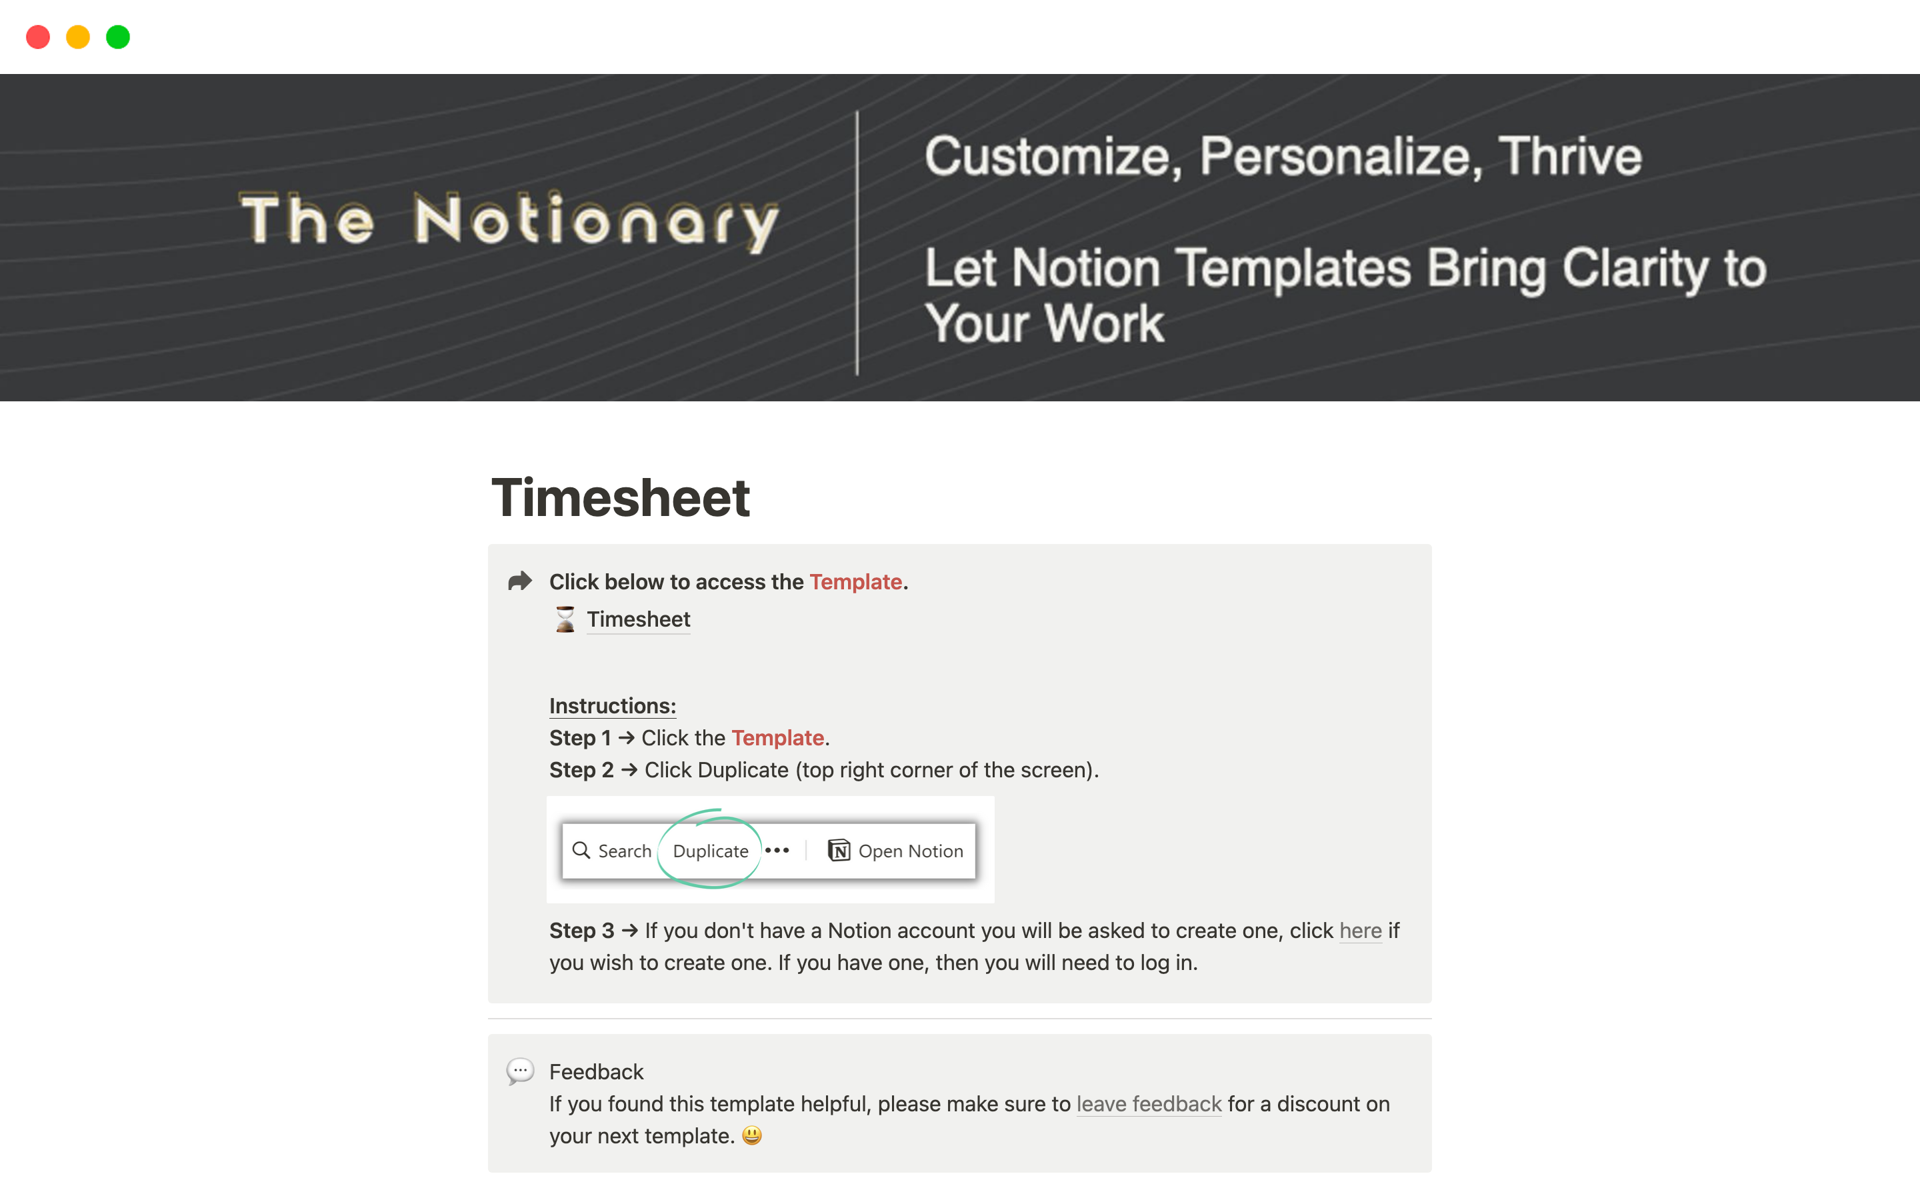 The Notionary provides a template for productivity and organization needs, with a comprehensive guide to navigate through the template seamlessly. 